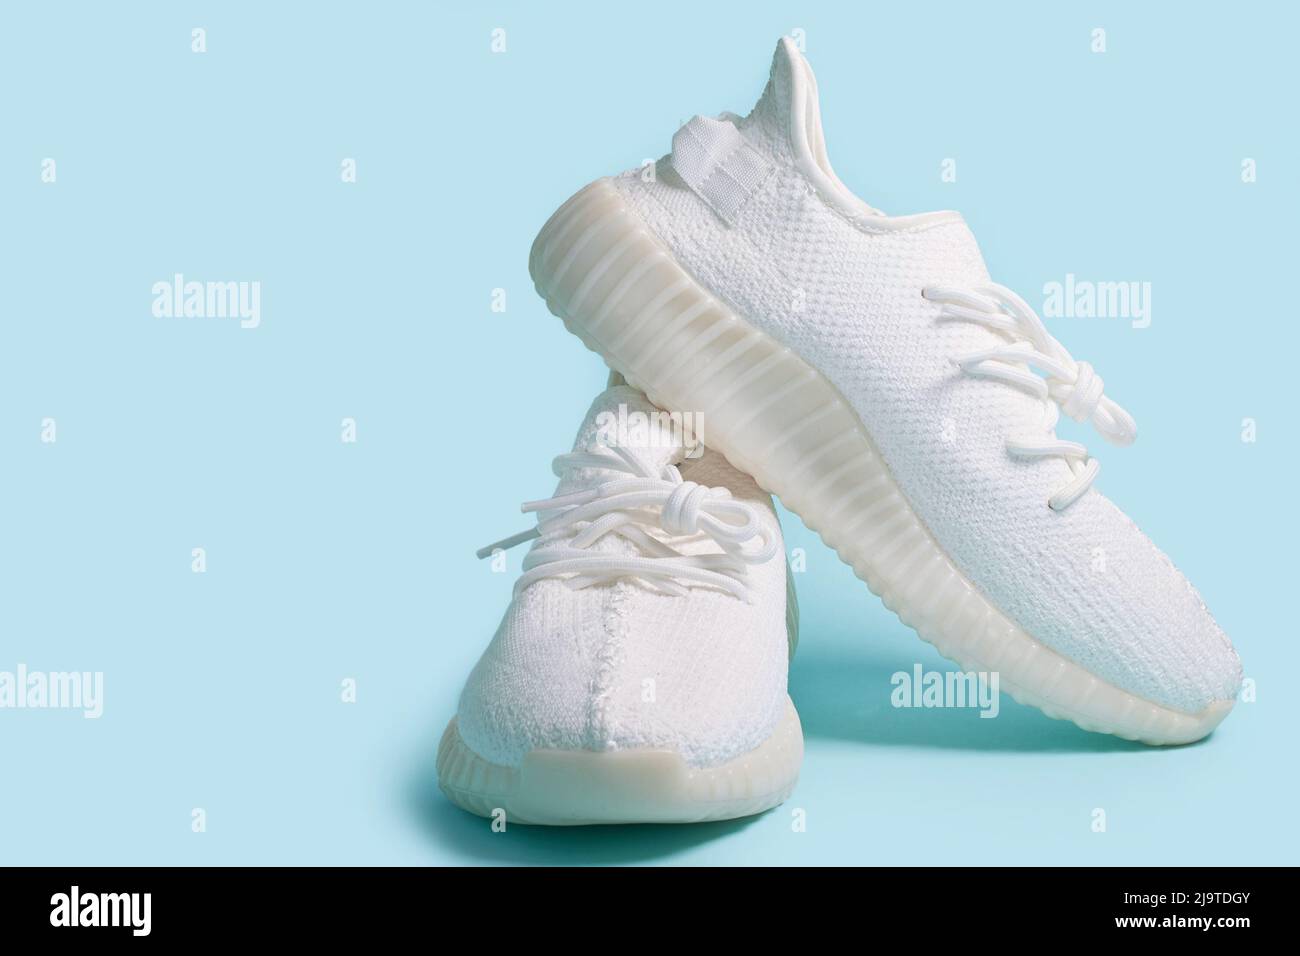 A pair of white sneakers on a blue background Stock Photo